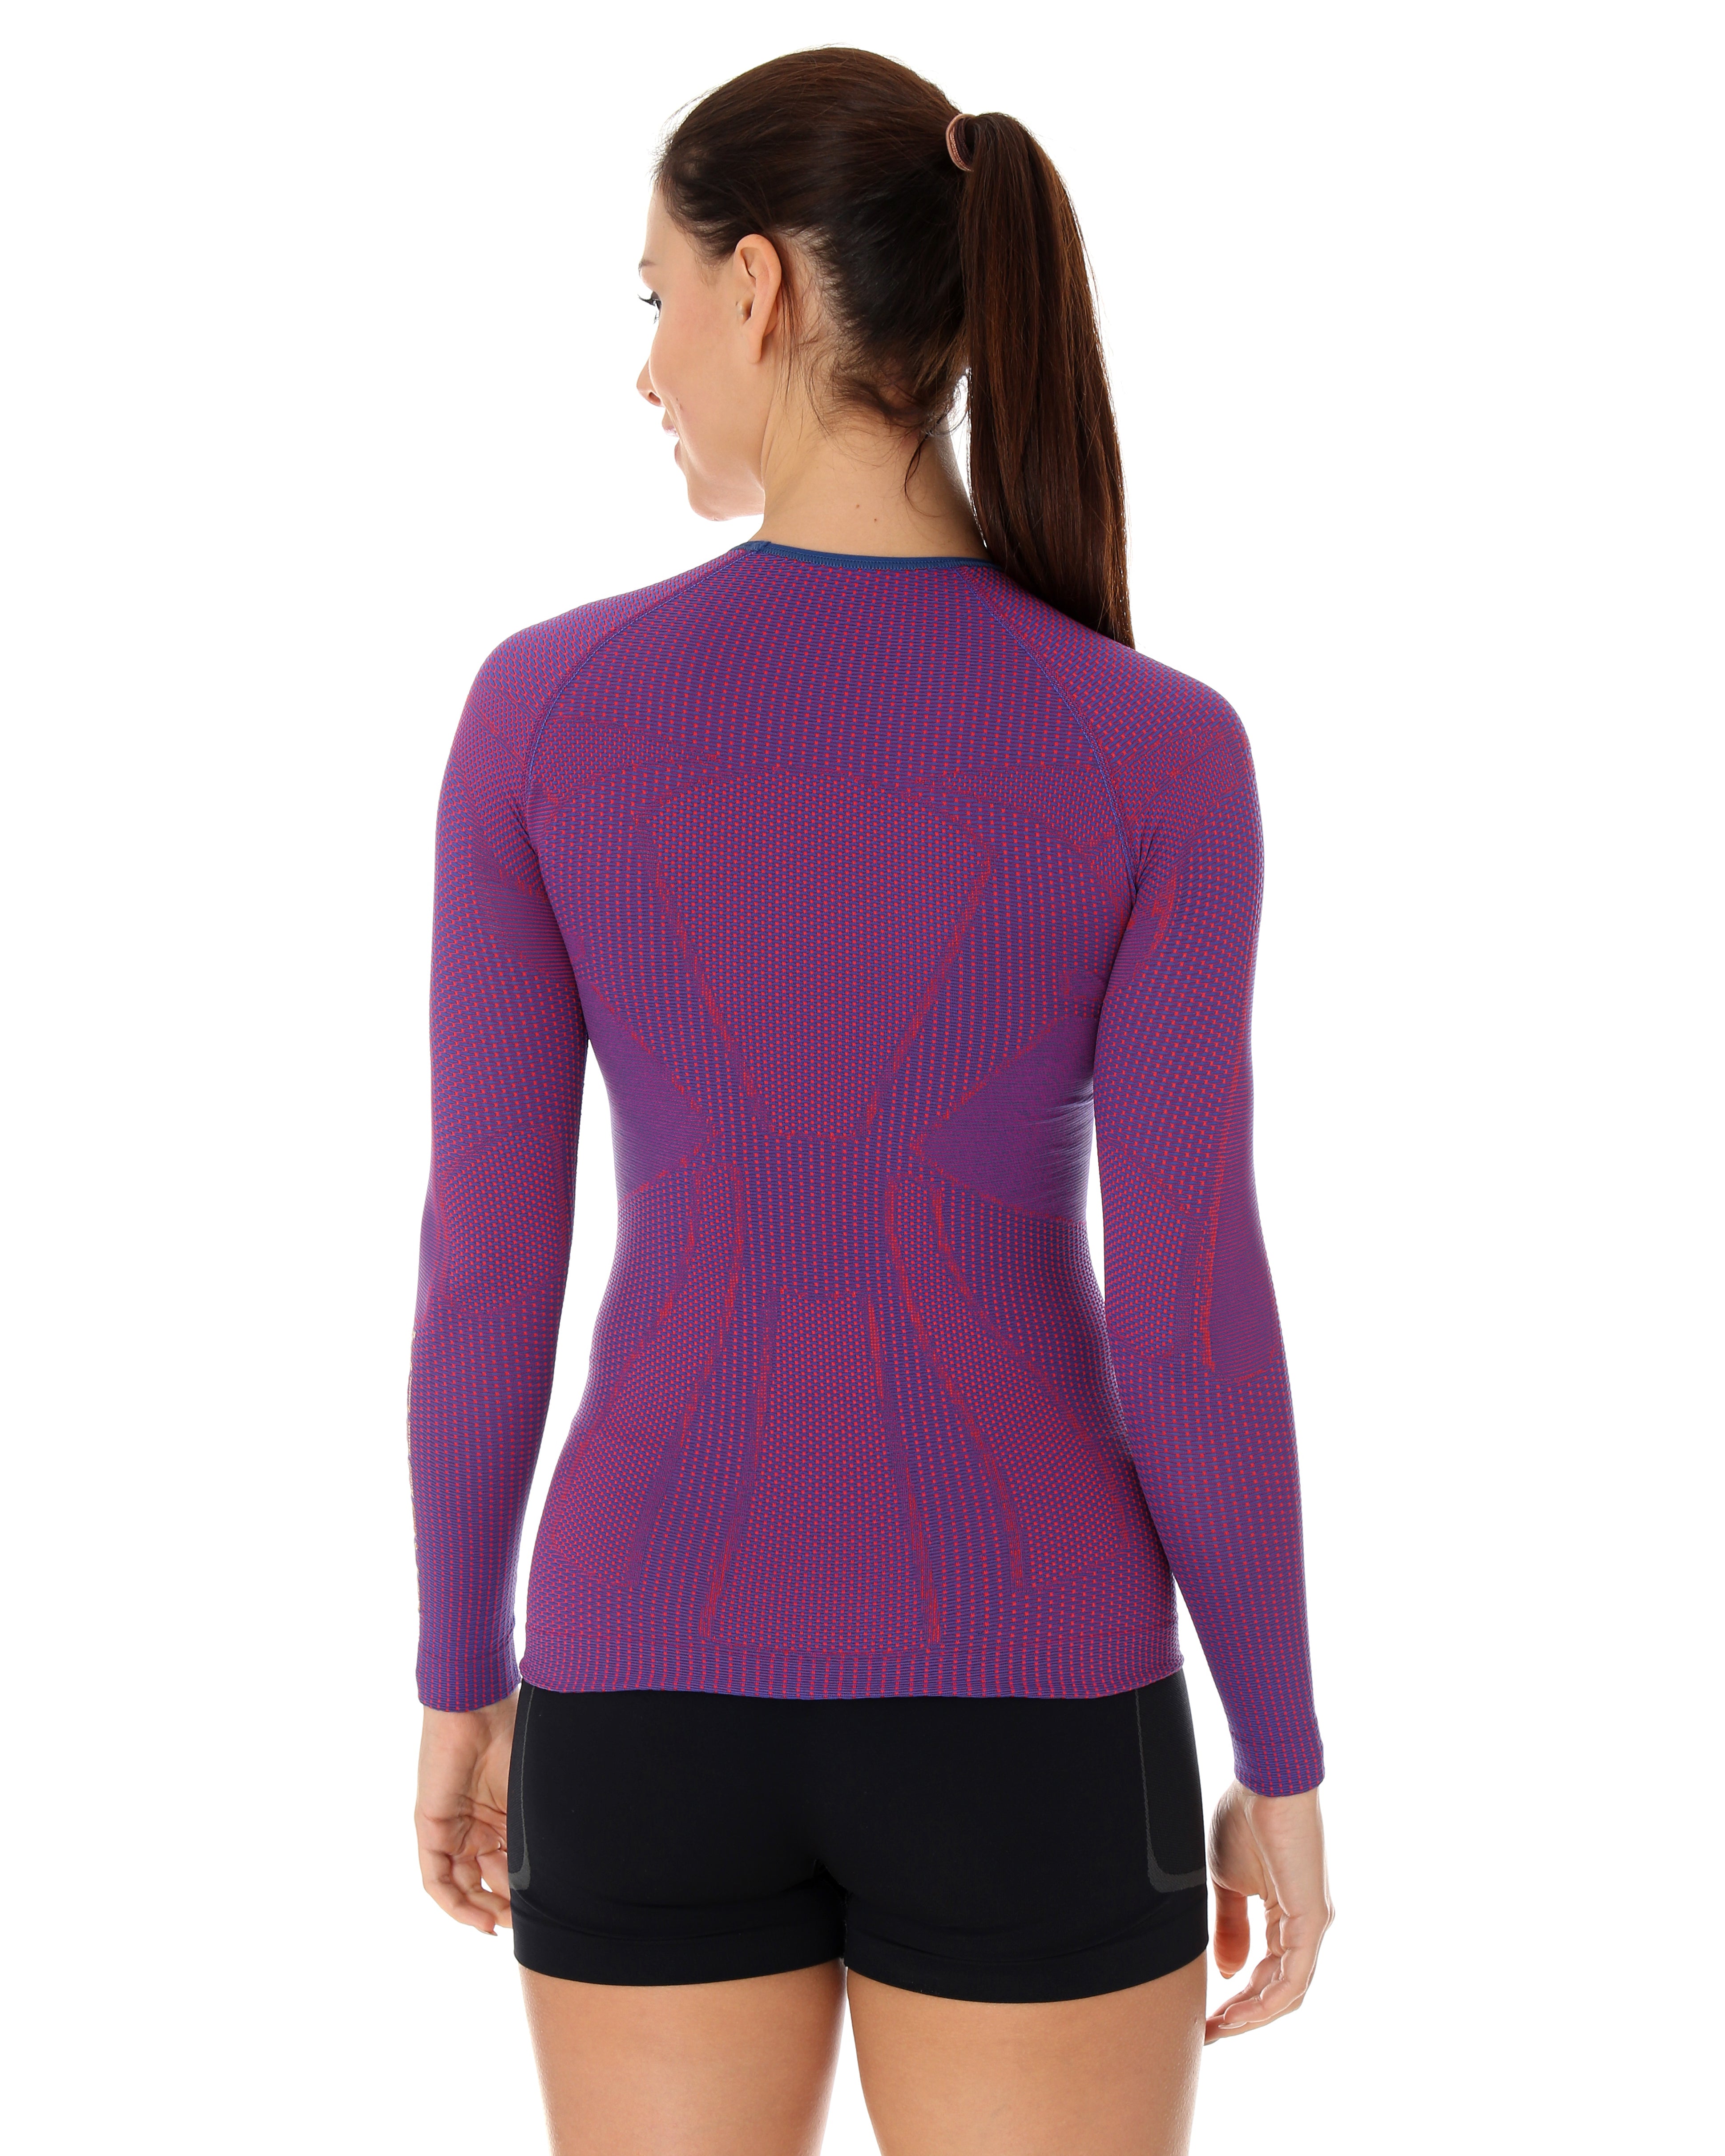 Women's purple 3D Run Pro long-sleeve shirt. With 3D woven mesh fabric for increased breathability during intense activity,  